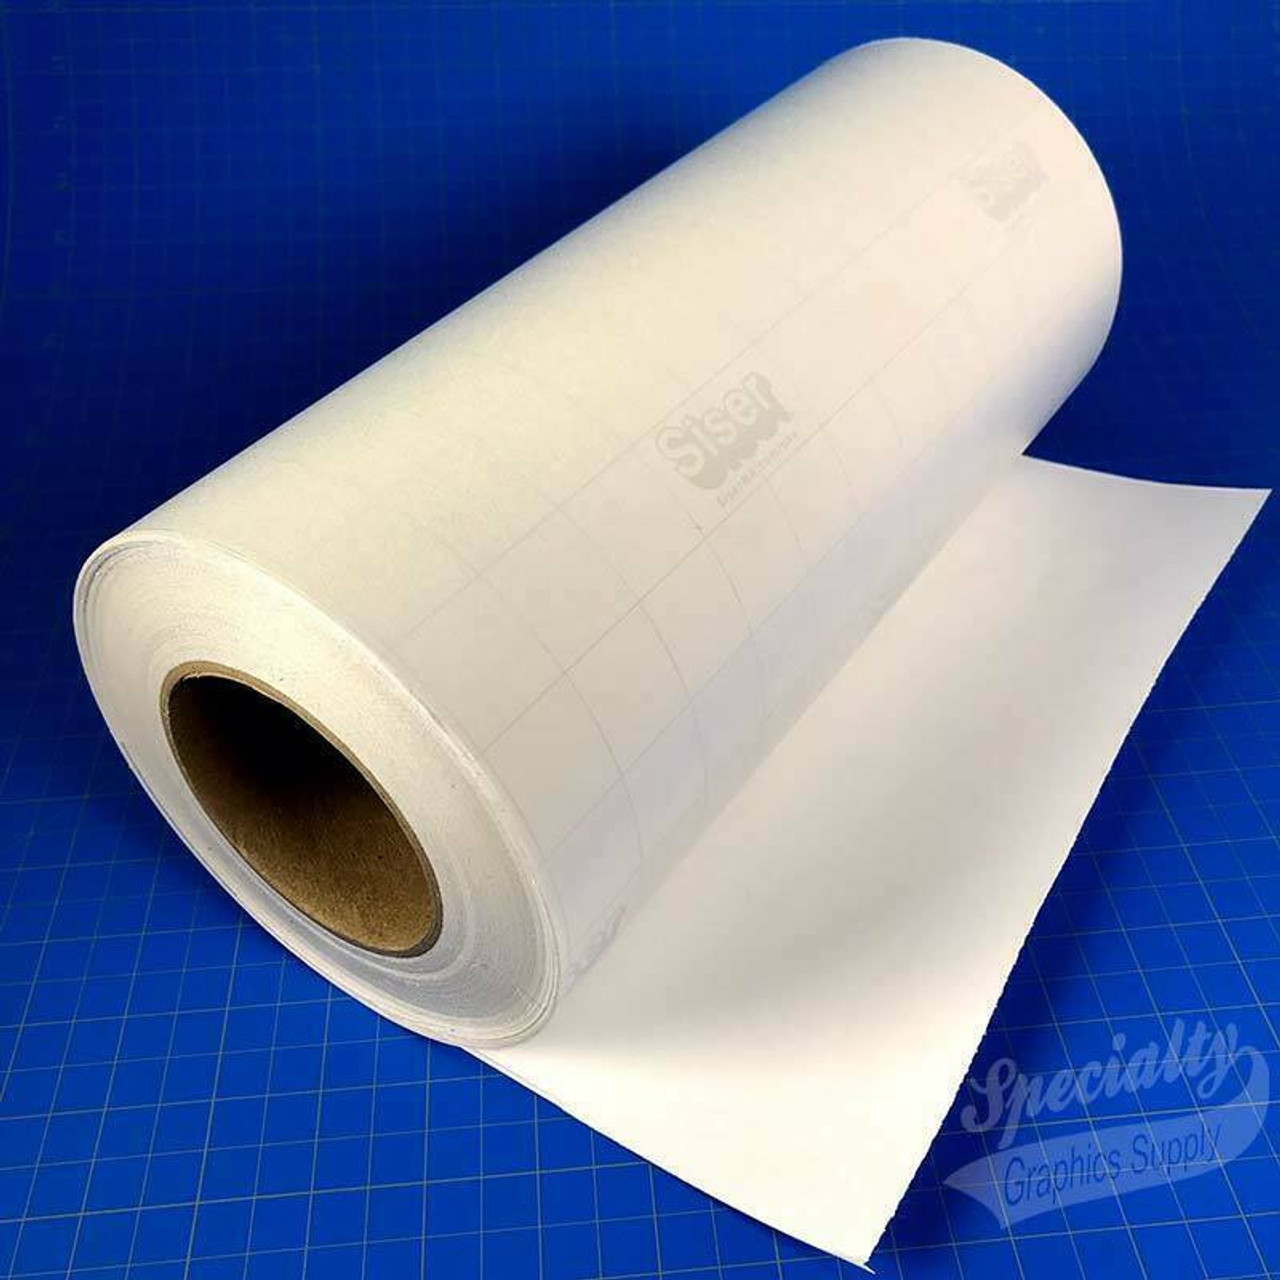  Clear Transfer Tape for Vinyl - 12 x 100' Roll, Made in USA,  Premium Vinyl Transfer Tape for Cricut & Silhouette Cameo, Medium to High  Tack Transfer Tape for Cricut Vinyl